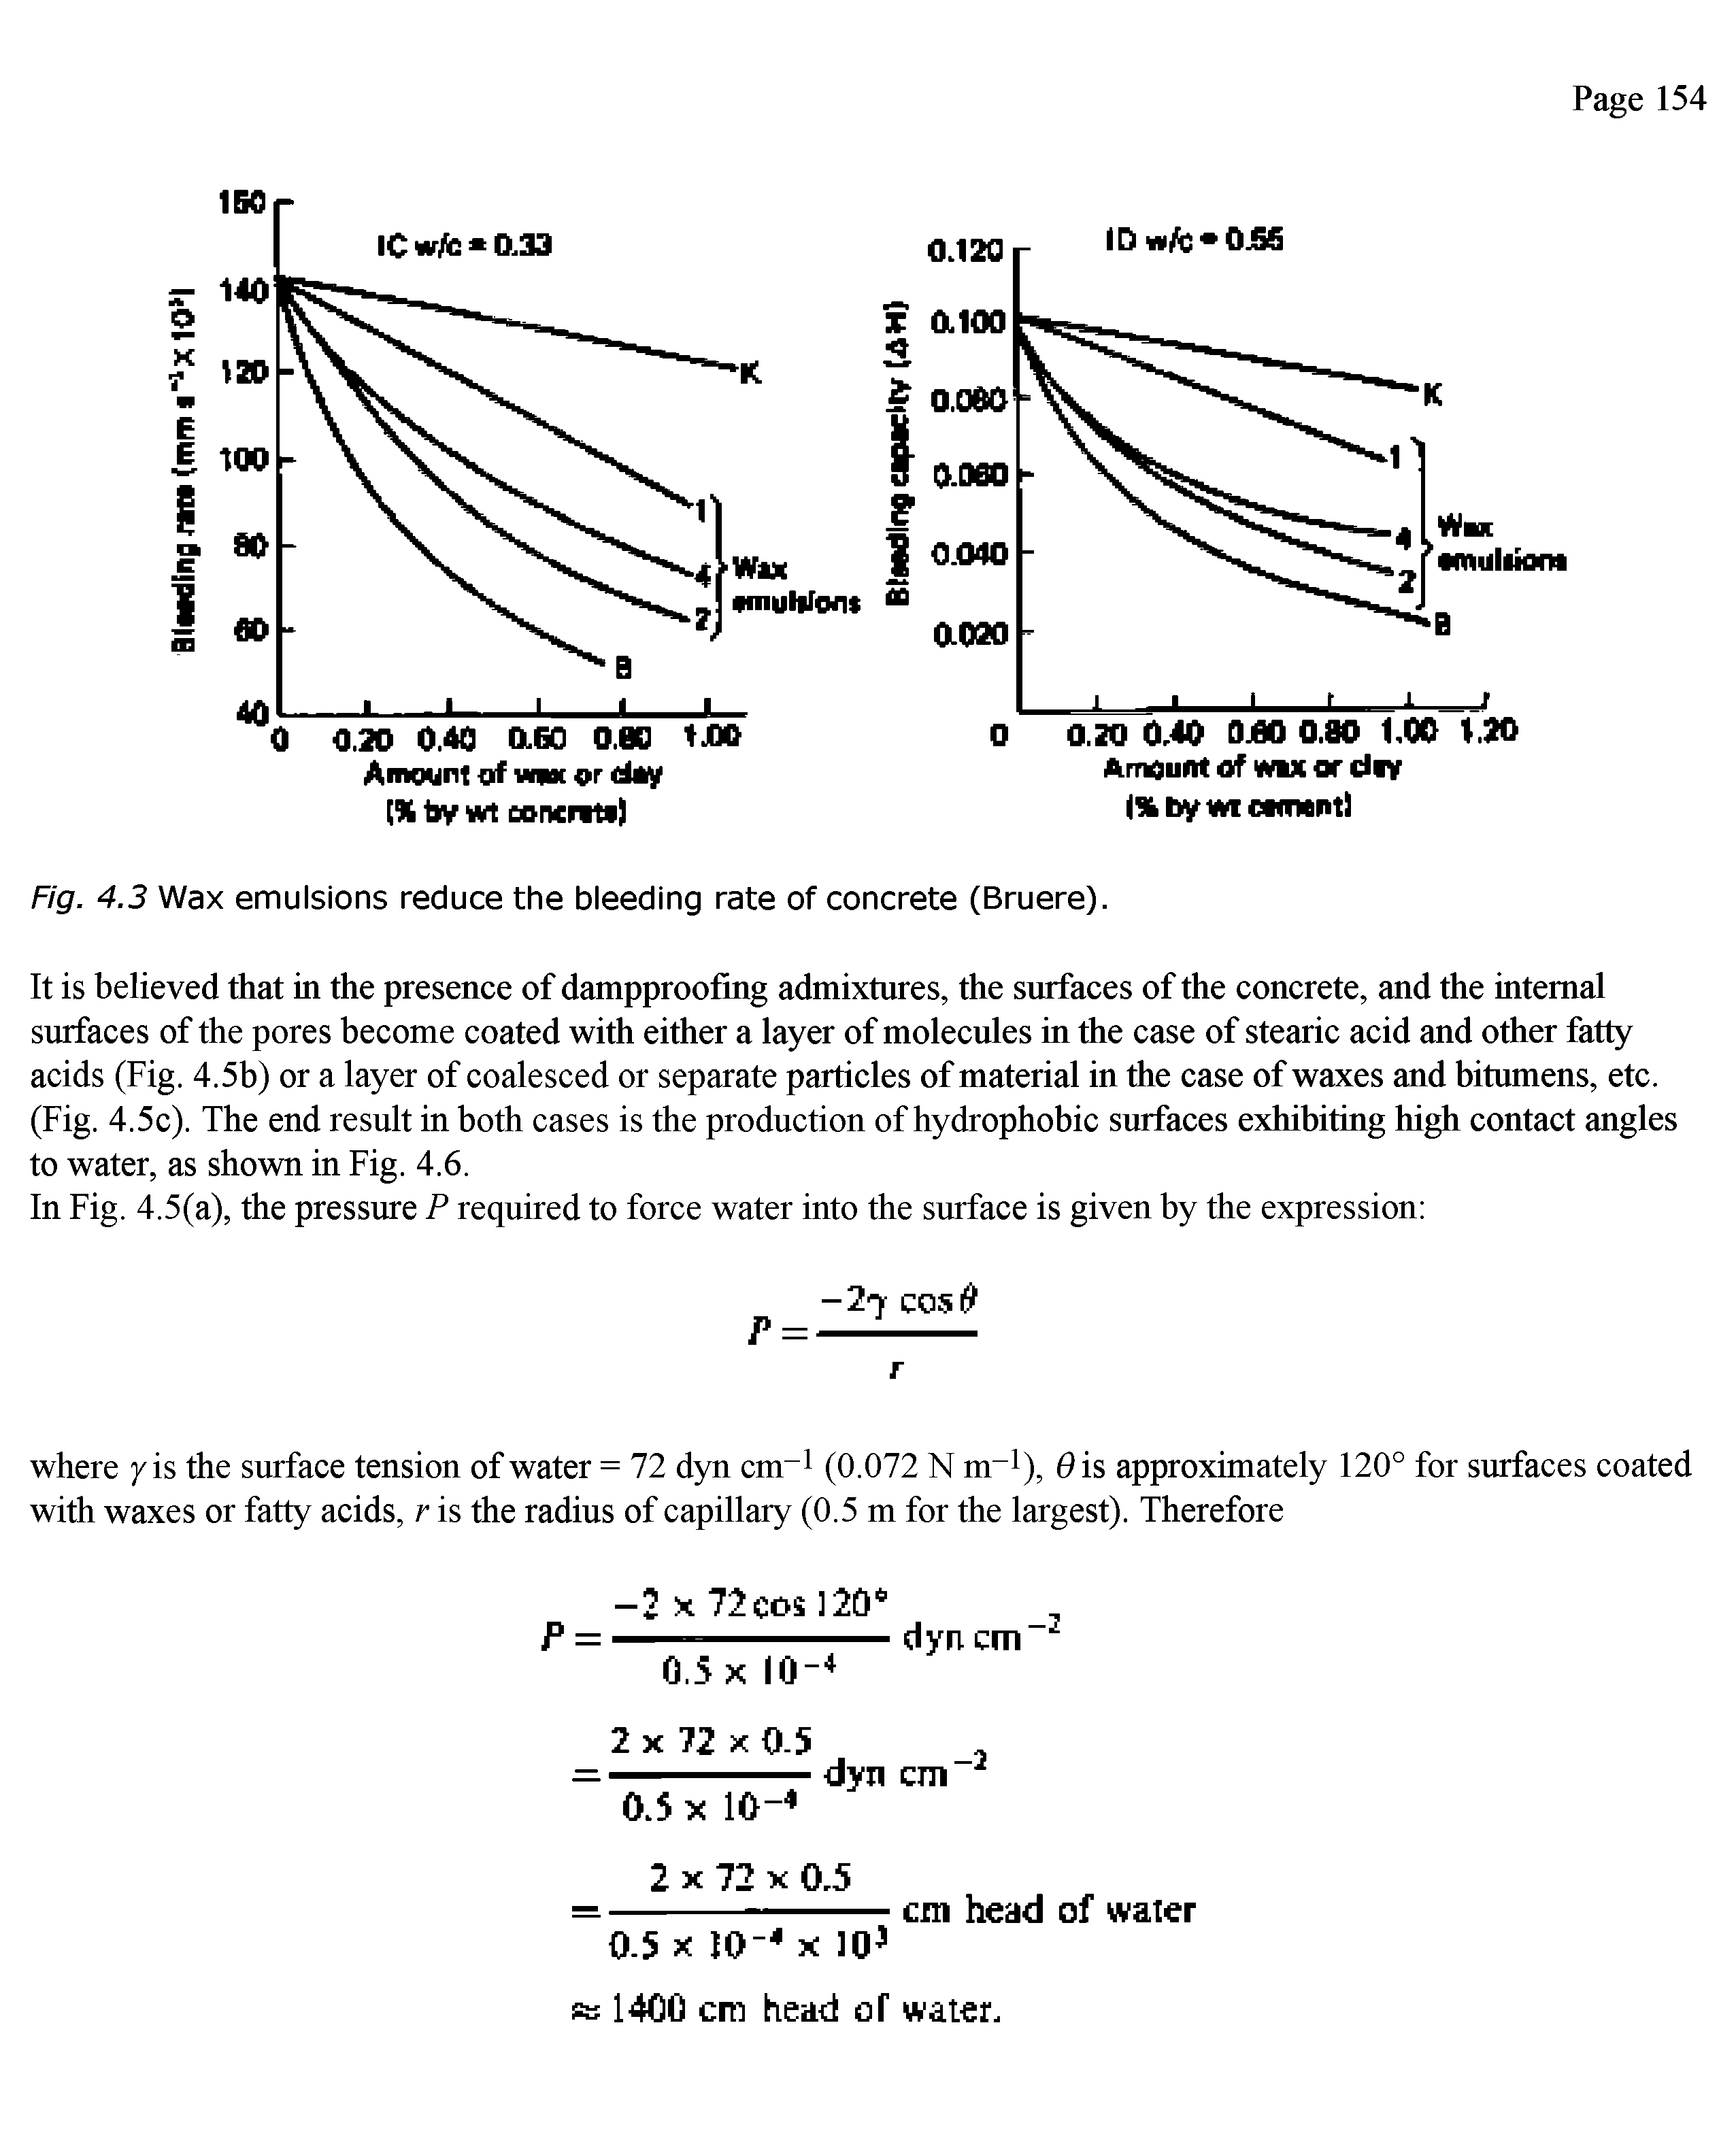 Fig. 4.3 Wax emulsions reduce the bleeding rate of concrete (Bruere).